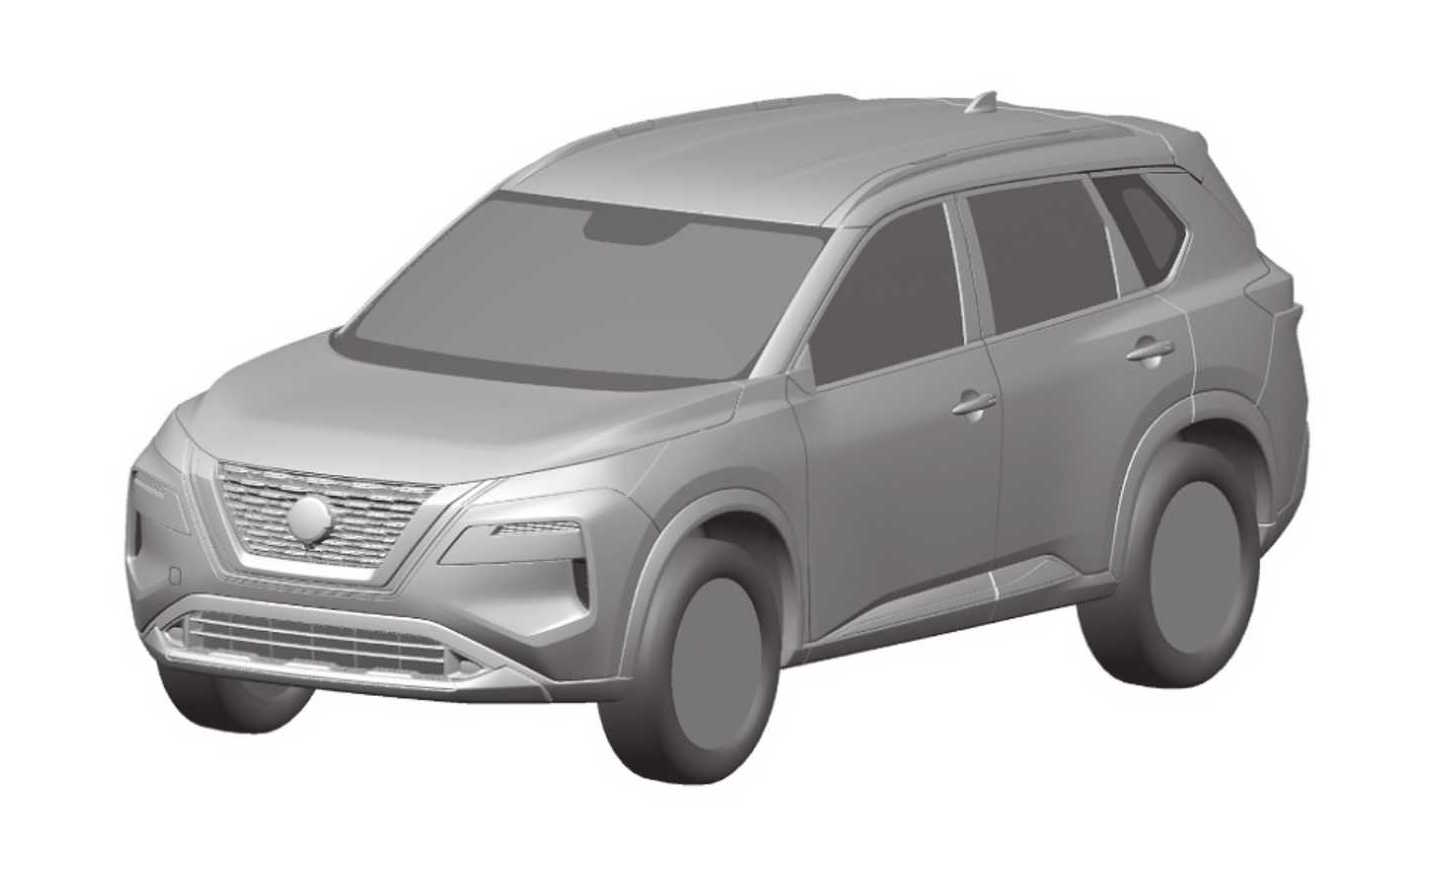 2021 Nissan X-Trail patent images surface, reveal new design